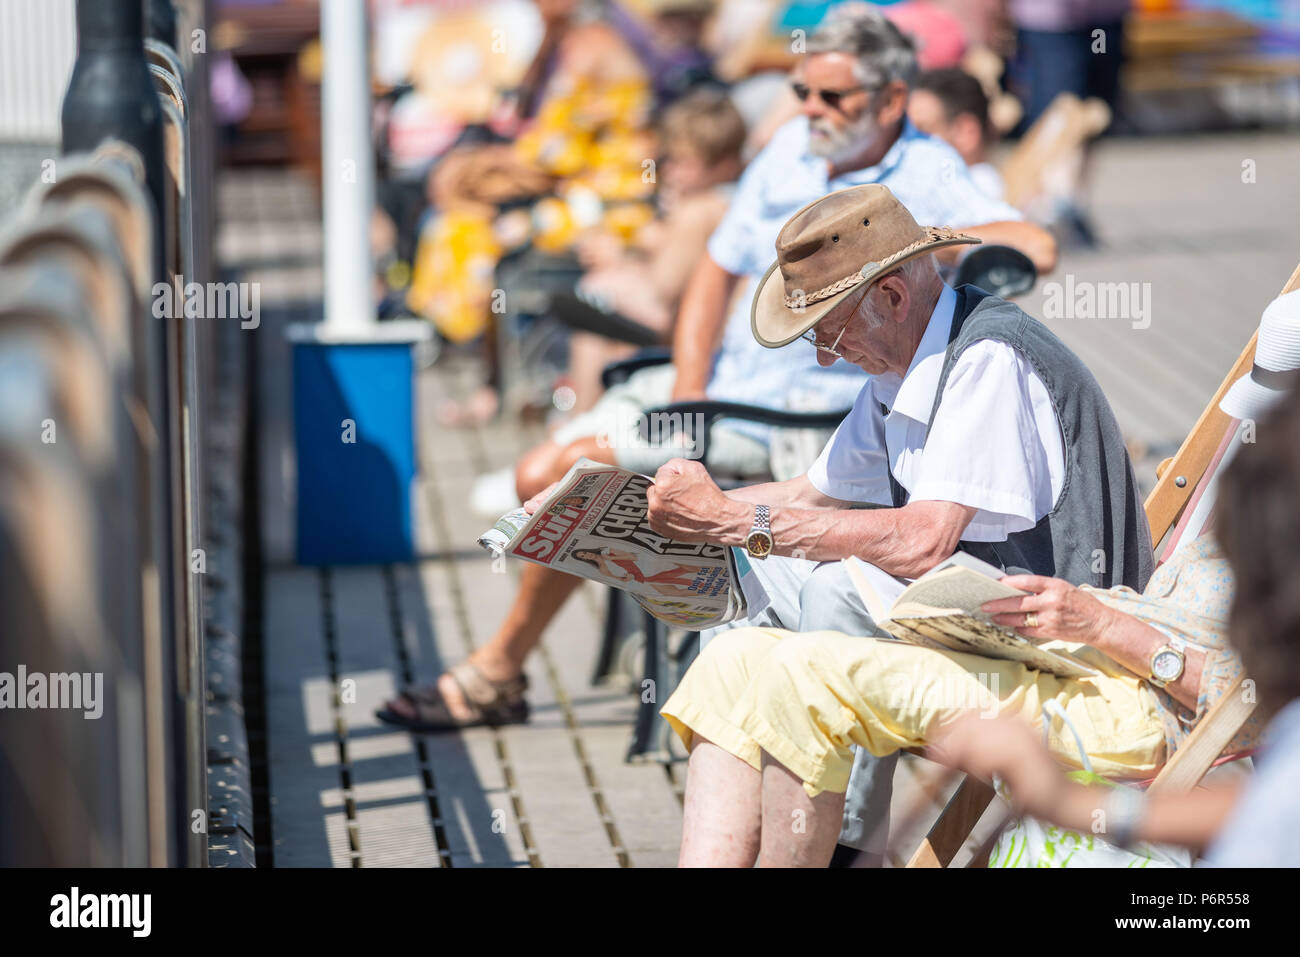 Skegness, UK. 2nd July 2018. As temperatures continue to rise across the UK during the current heatwave, an old man sits in his dekchair on Skegness Pier and reads his newspaper in the hot sunshine. Credit: Steven Booth/Alamy Live News. Stock Photo